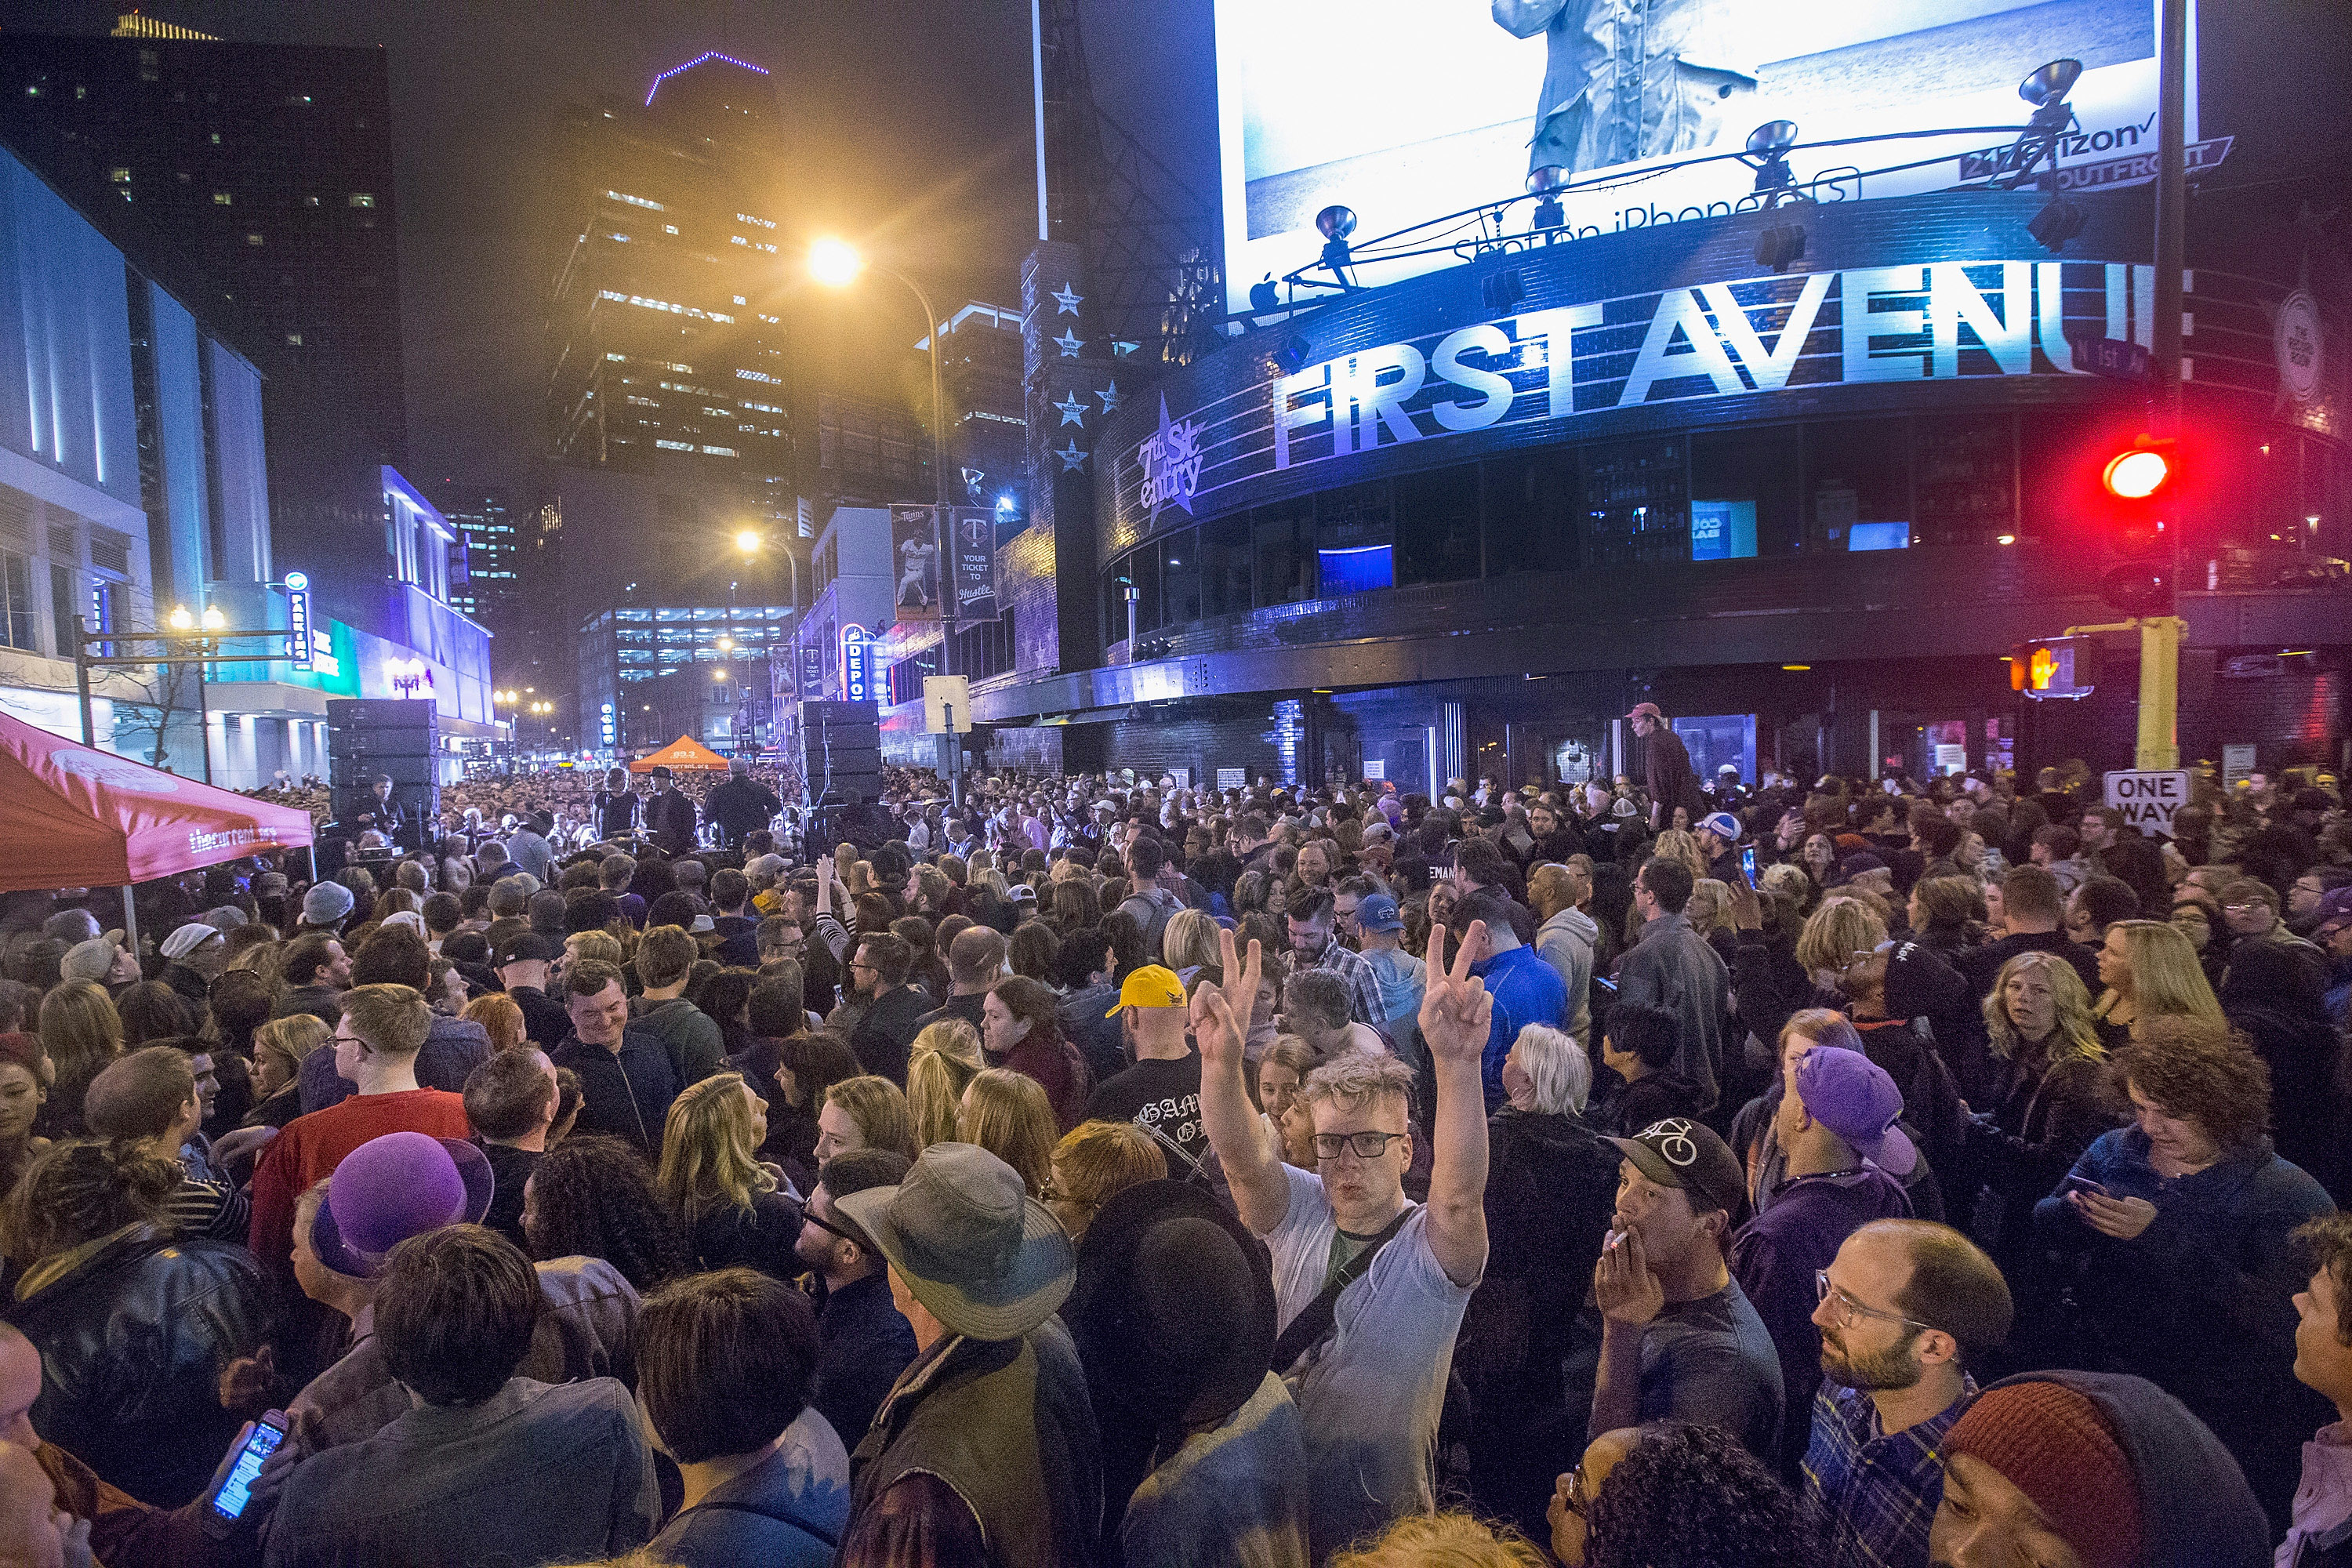 Fans listen to Prince music during a memorial street party outside the First Avenue nightclub in Minneapolis, Minnesota, on April 21, 2016 | Source: Getty Images